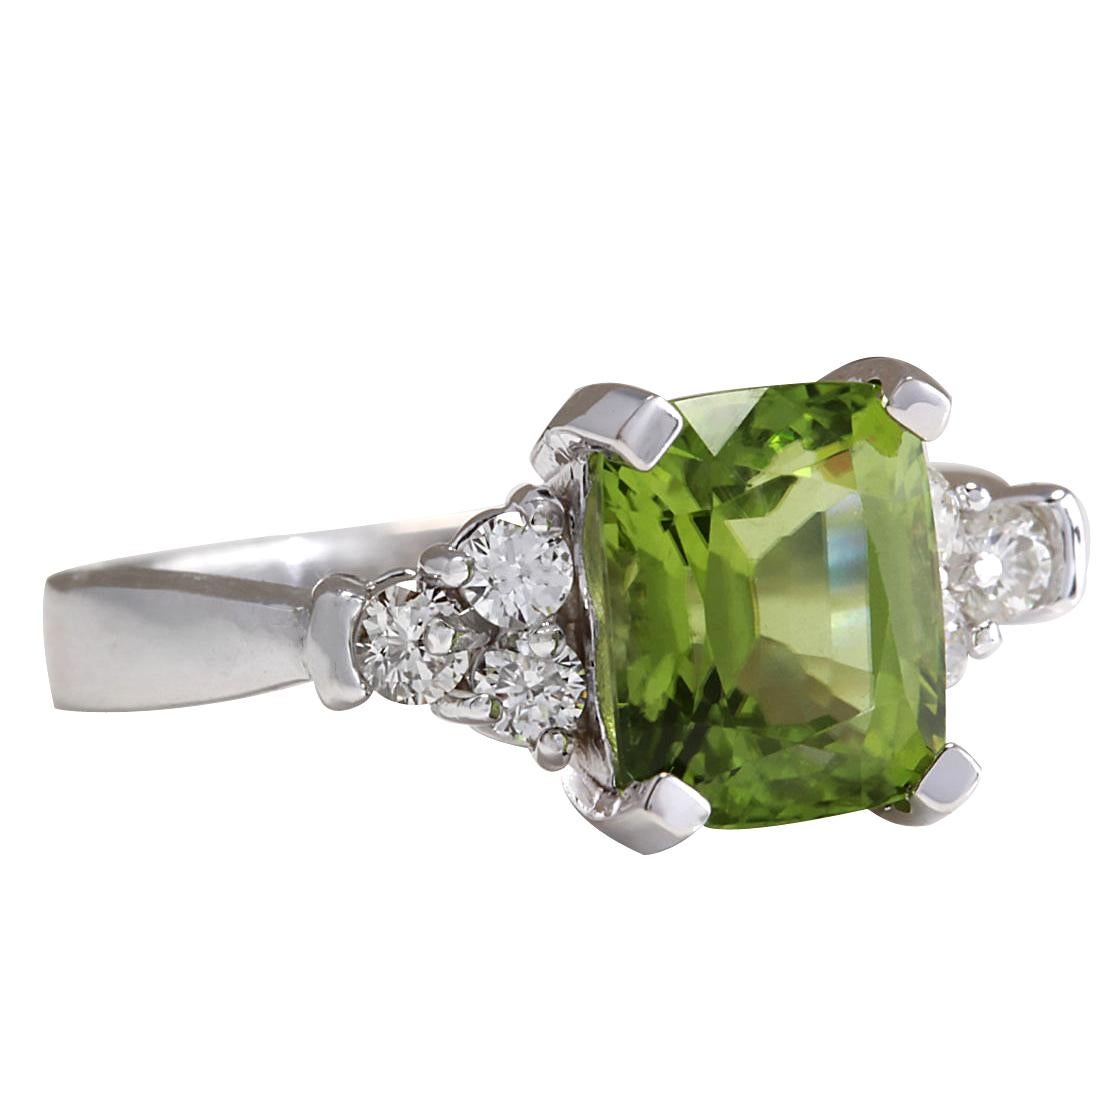 Introducing our exquisite 3.38 Carat Natural Peridot Ring, delicately crafted in 14K White Gold. This stunning piece showcases a captivating peridot gemstone weighing 3.03 carats, measuring 9.00x7.00 mm, exuding its vibrant green hue. Accentuating